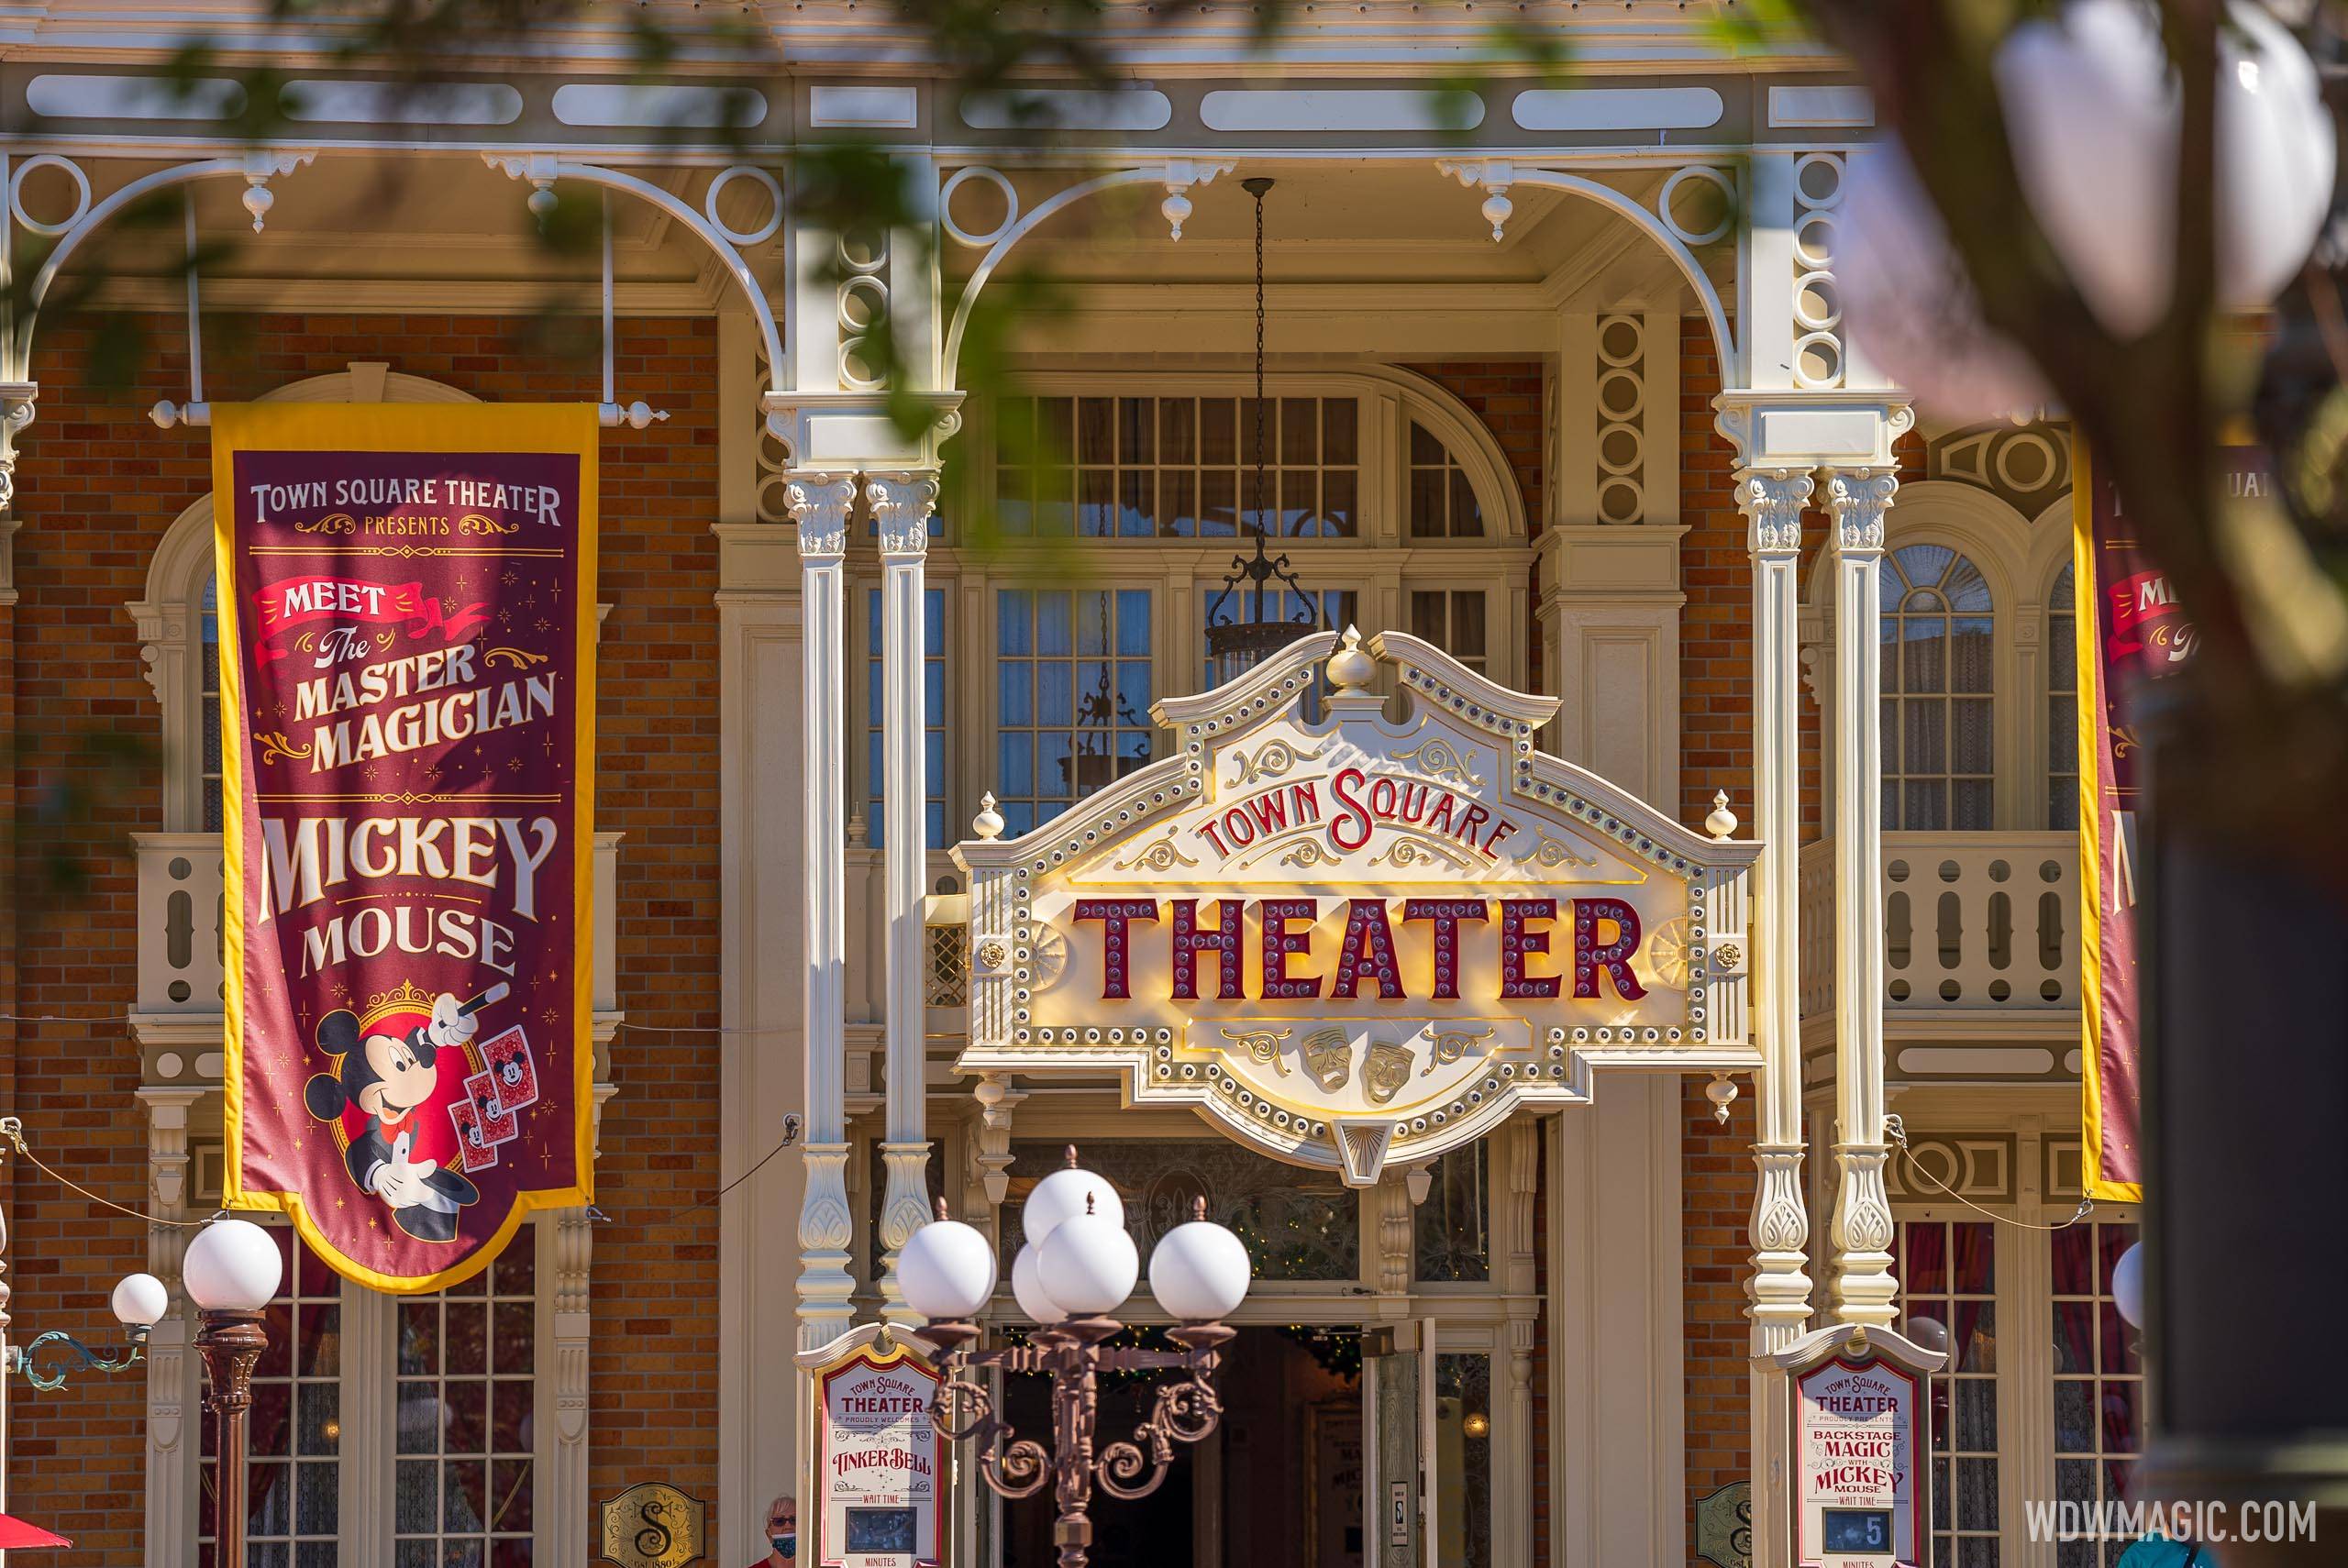 Is talking Mickey set to return to Town Square Theater in the near future?